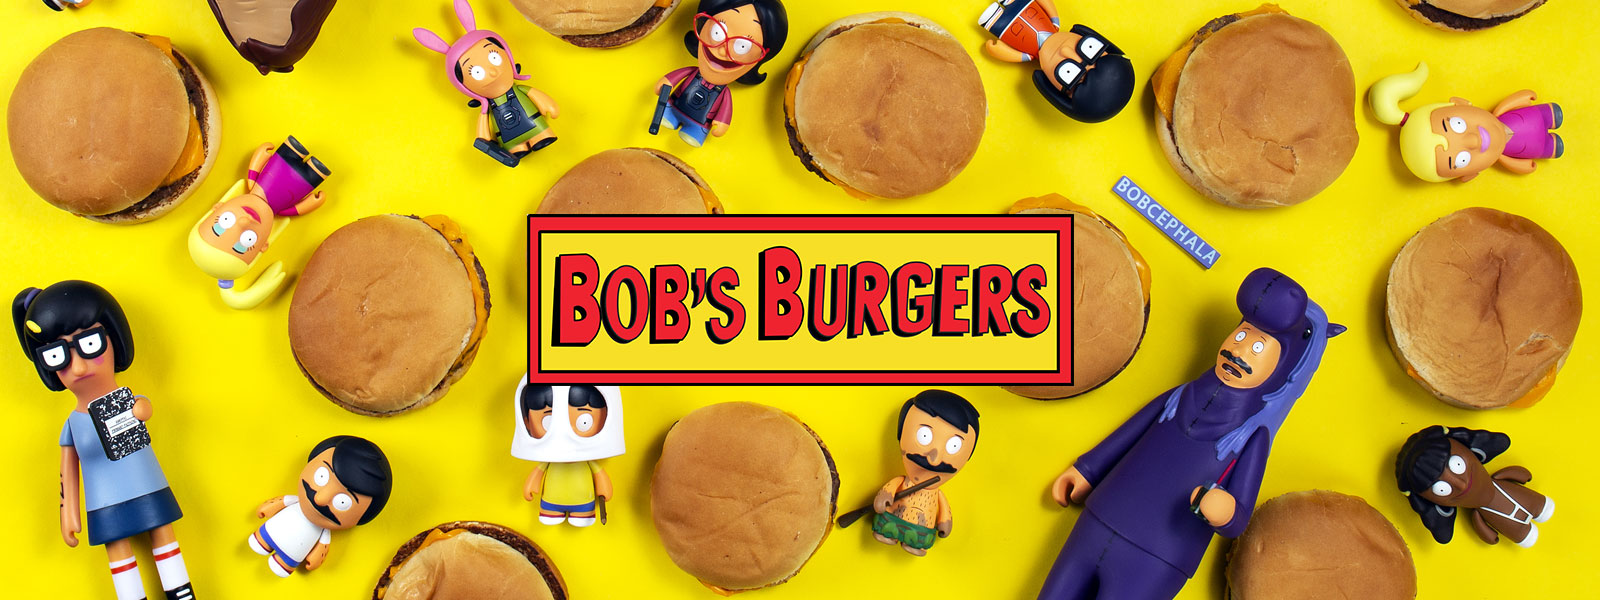 Bobs Burgers Toys, Art Figures & Collectibles by Kidrobot